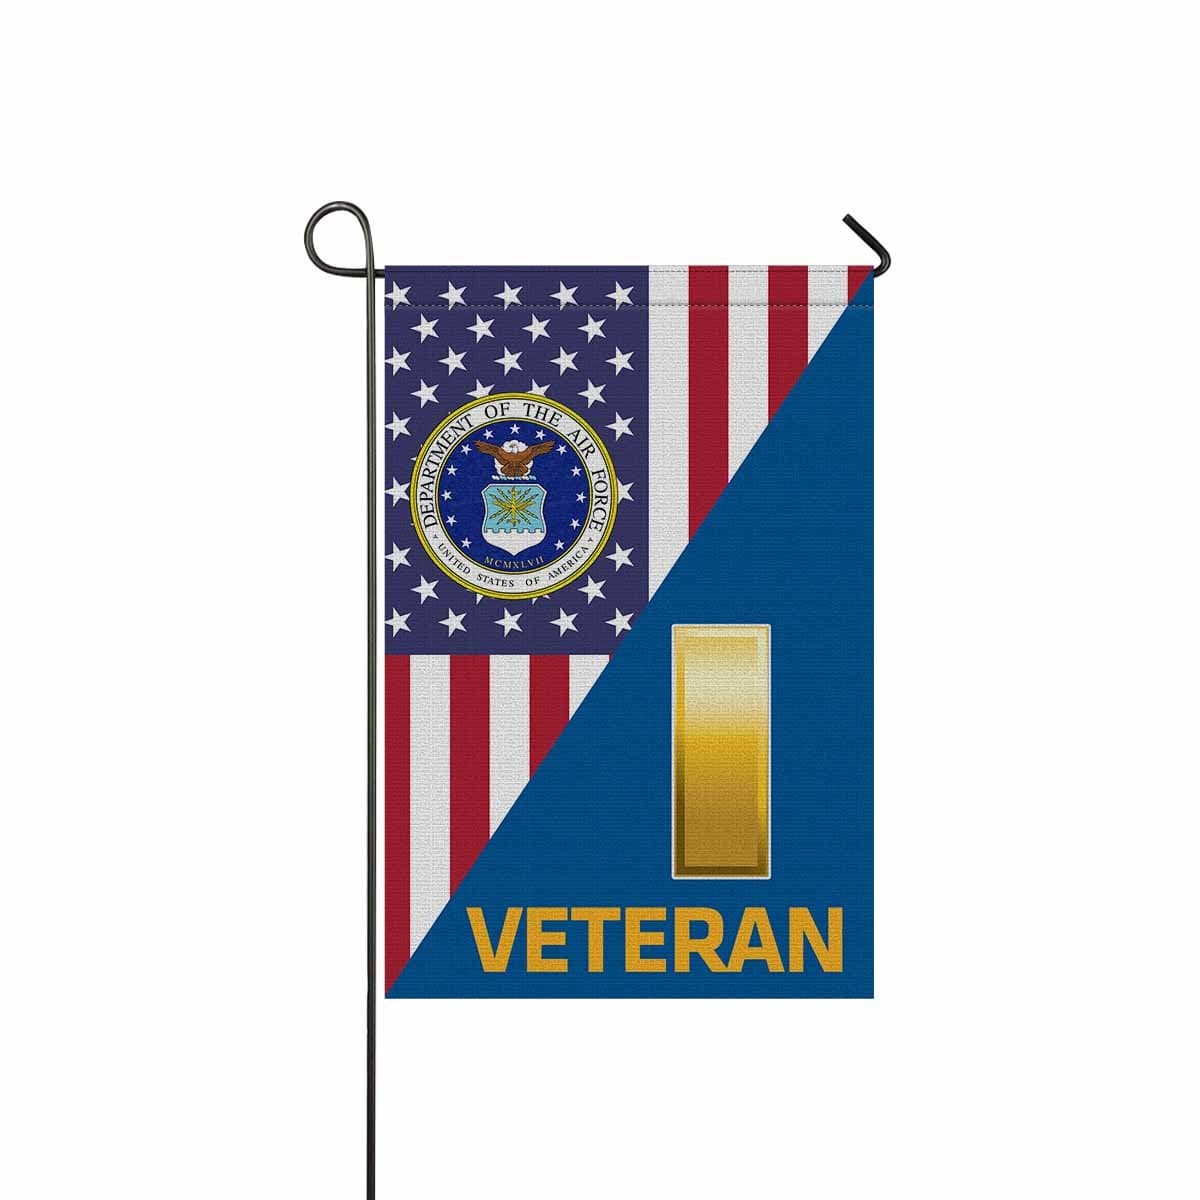 US Air Force O-1 Second Lieutenant 2d Lt O1 Commissioned Officer Veteran Garden Flag/Yard Flag 12 inches x 18 inches Twin-Side Printing-GDFlag-USAF-Ranks-Veterans Nation